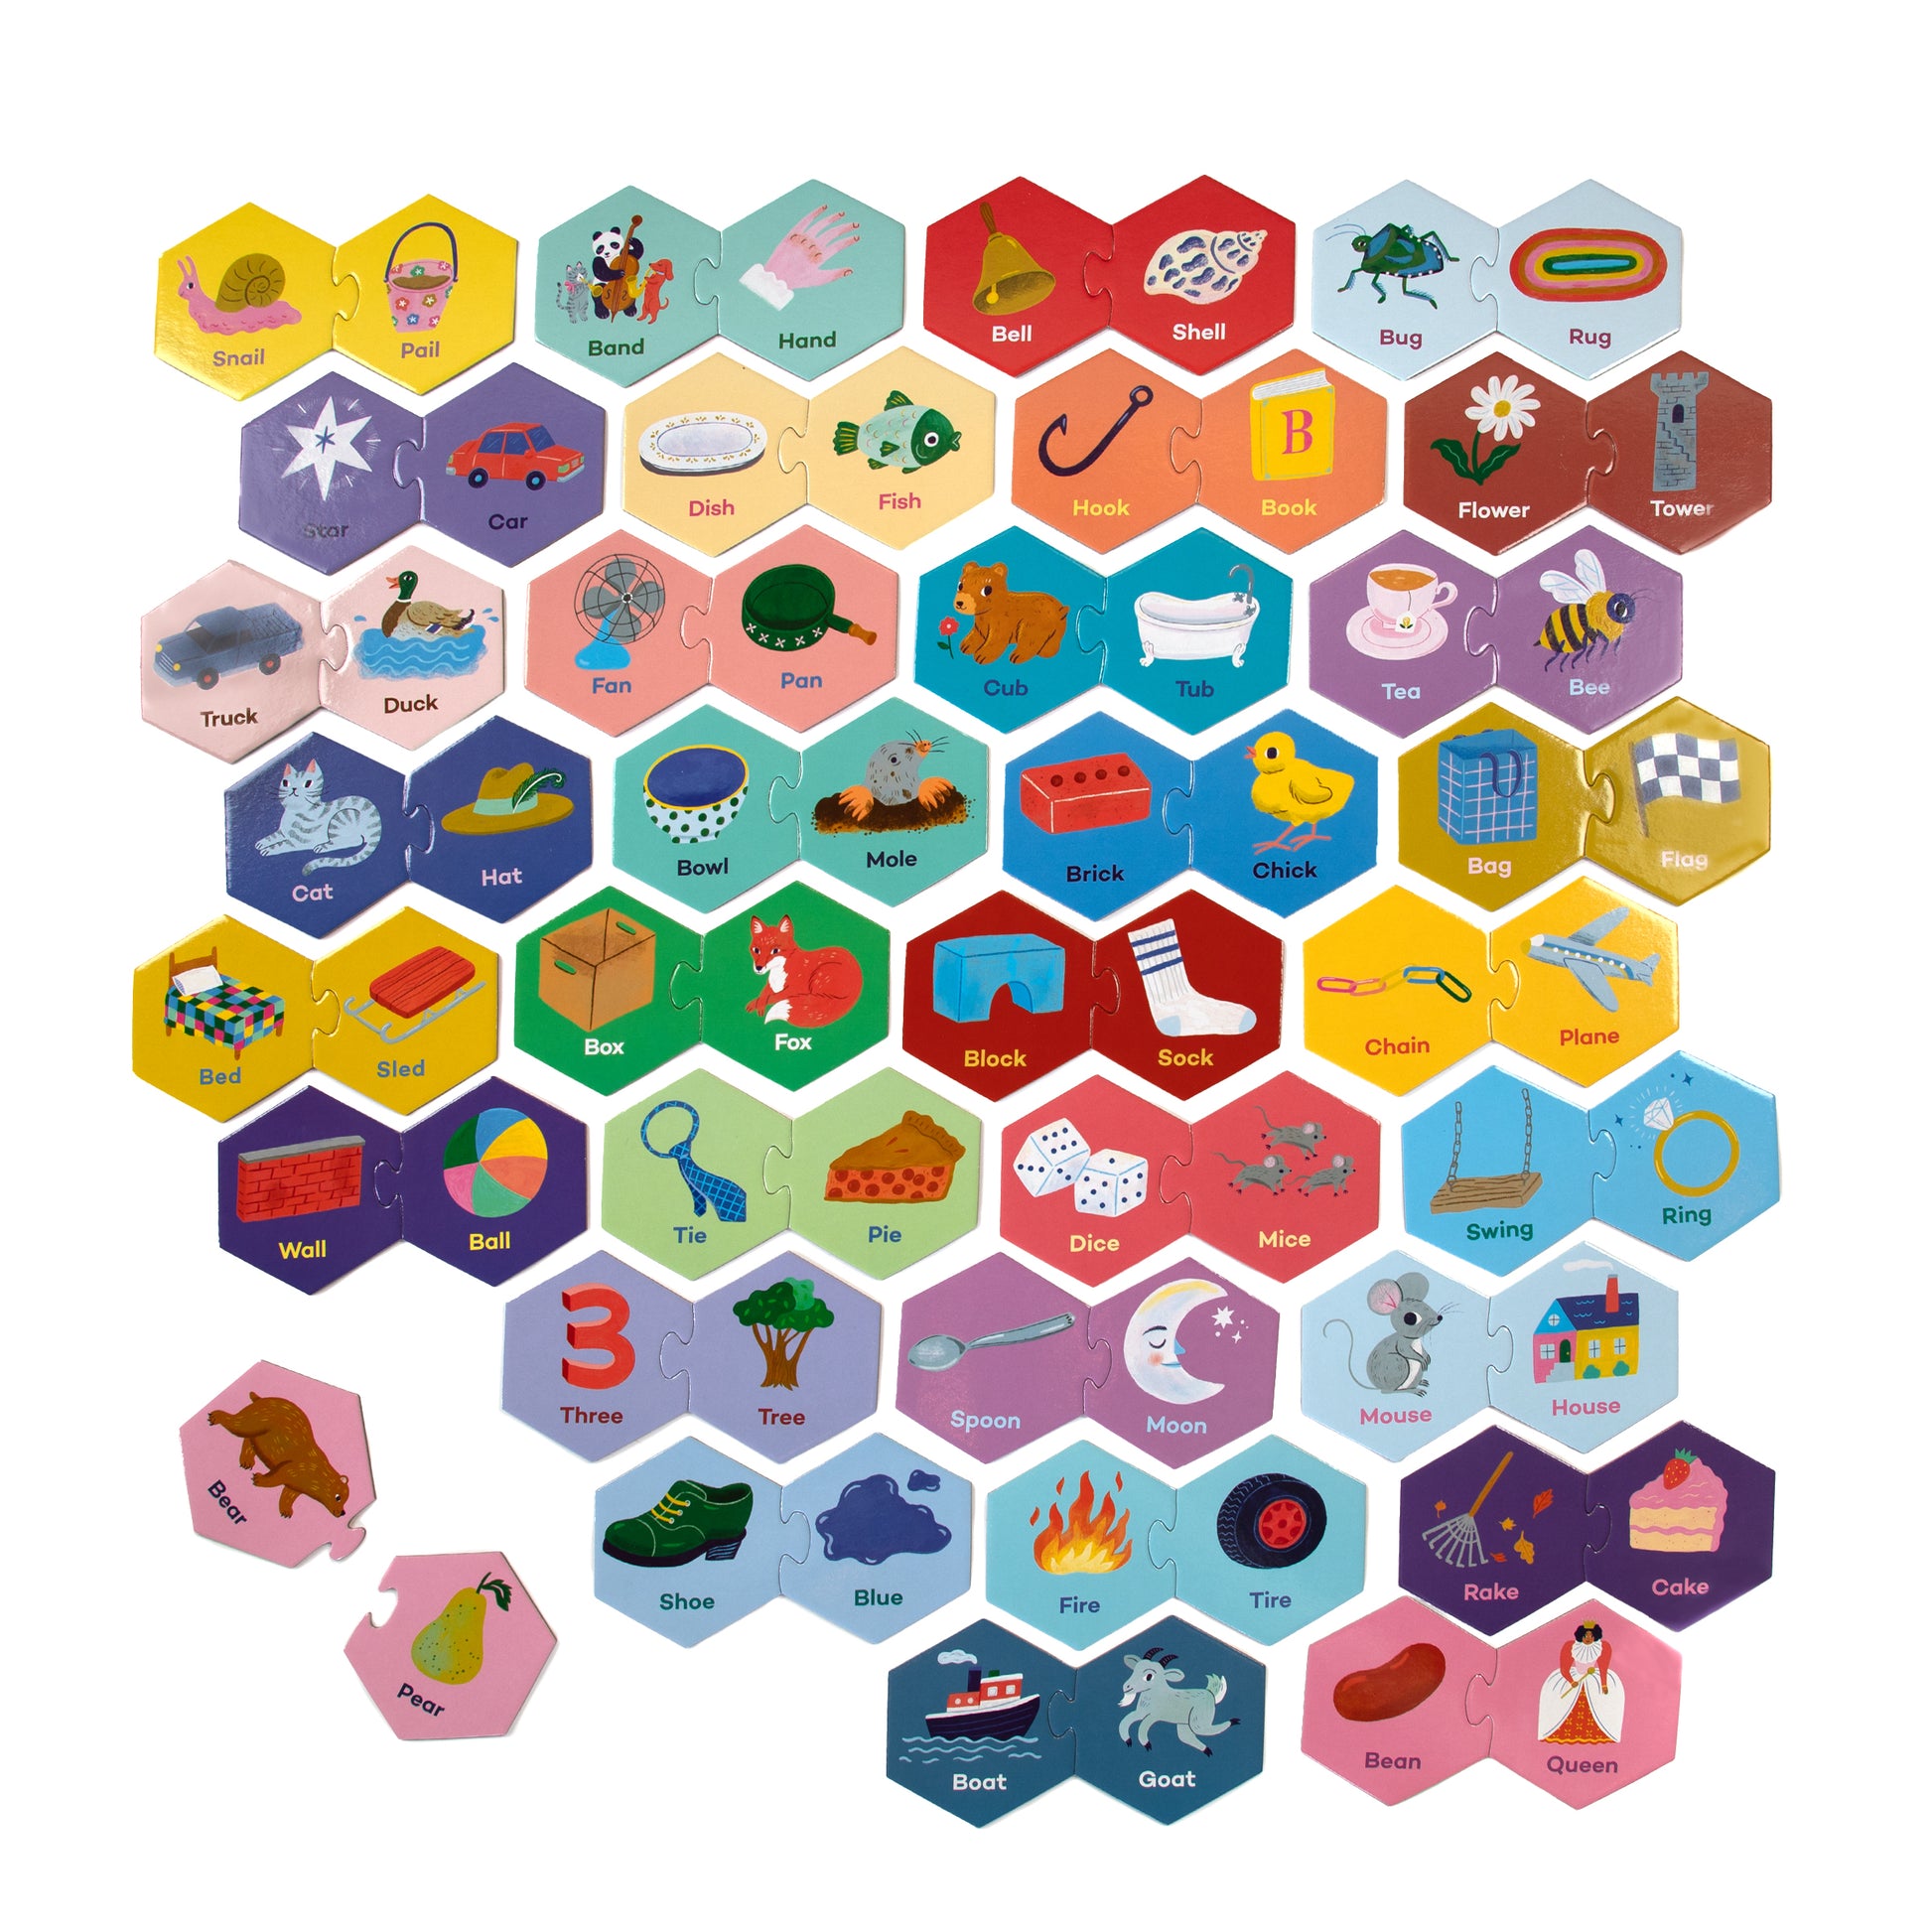 Rhyming Words Hexagon Puzzle Pairs by eeBoo | Unique Fun Gifts